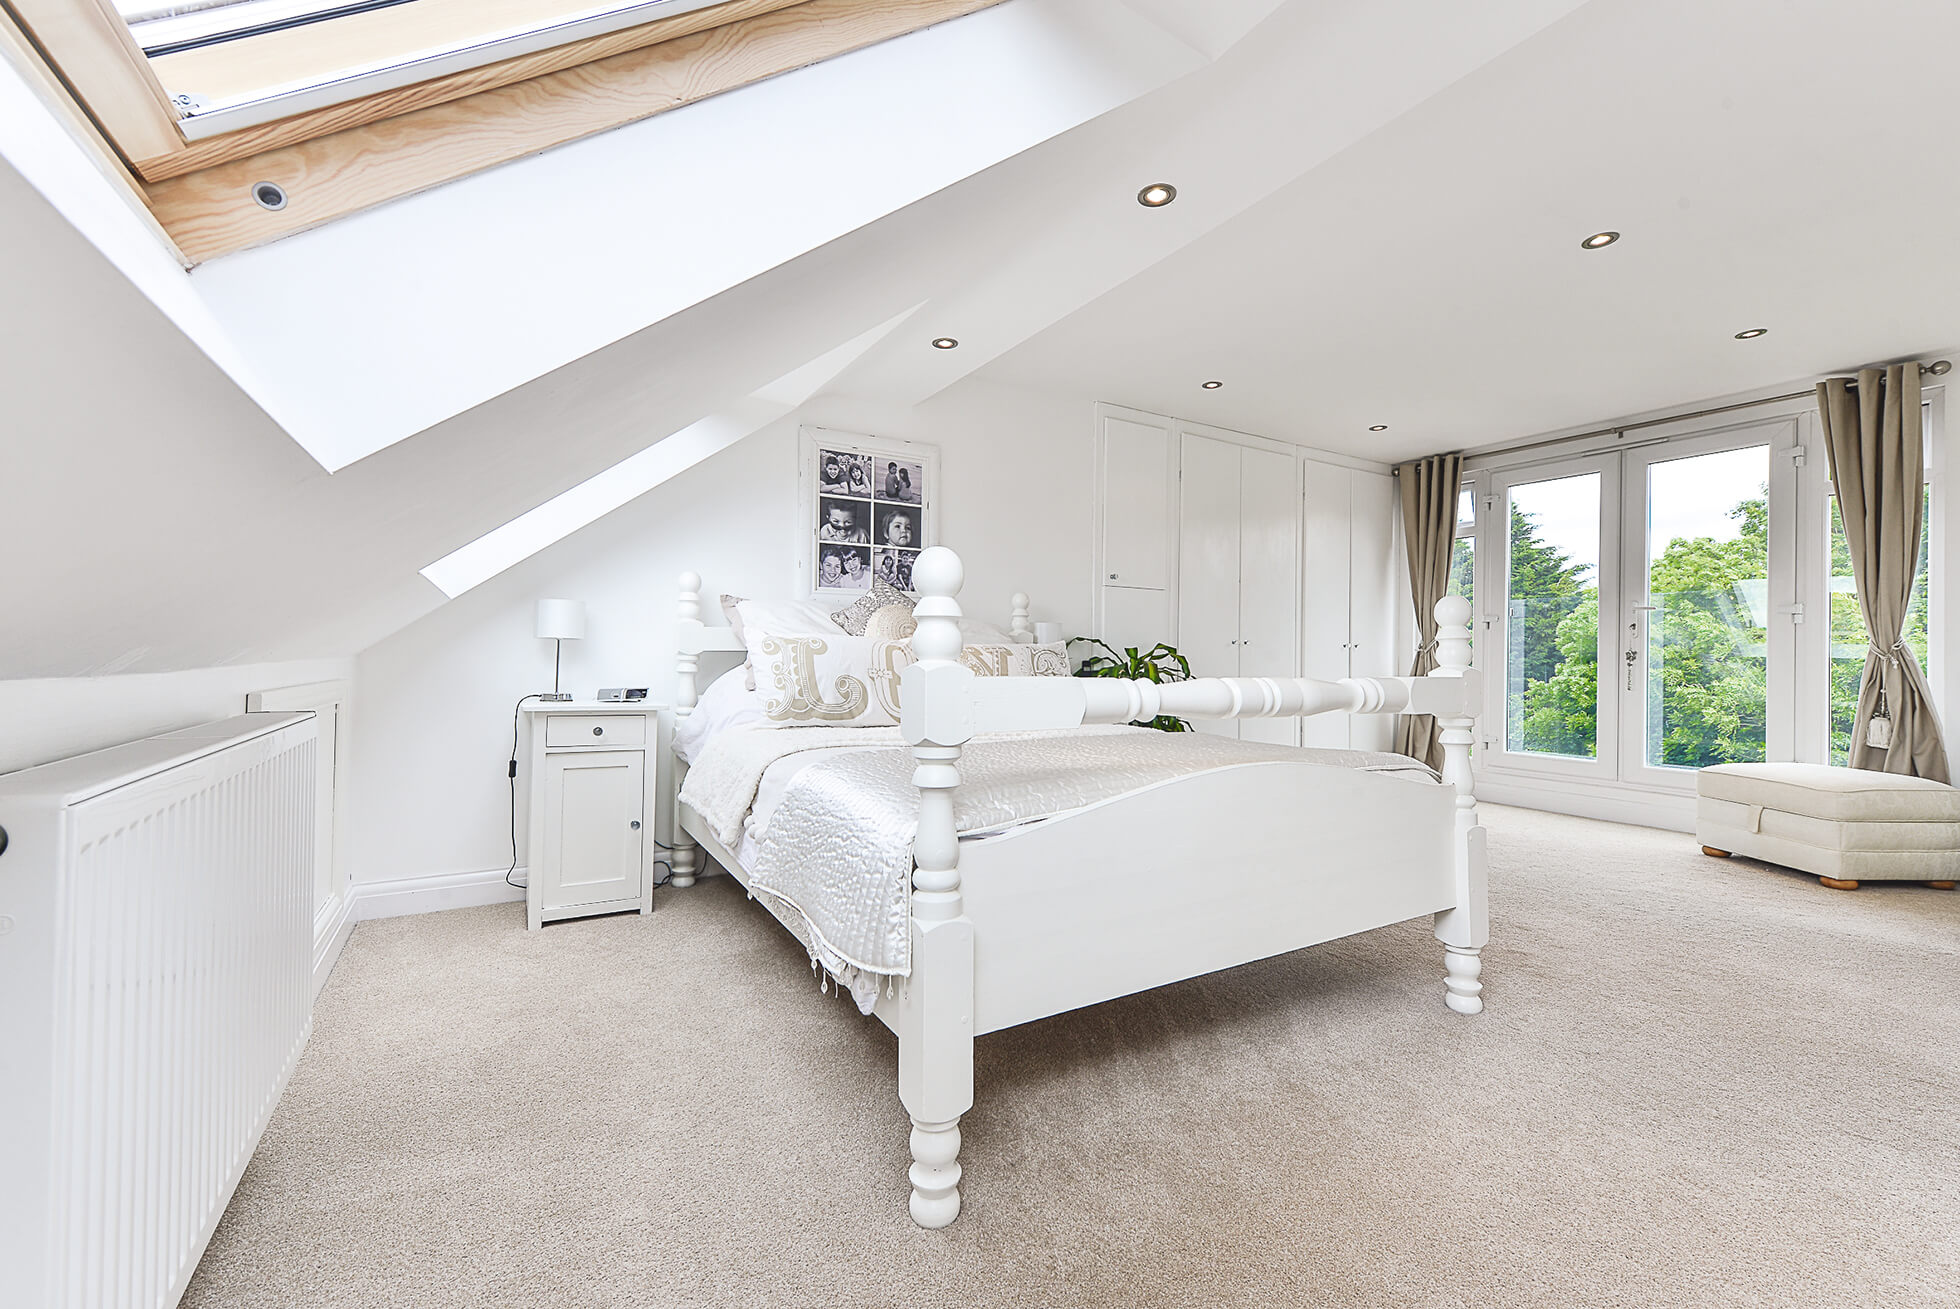 Do you have a question about converting your Loft in Dudswell? Here are the most popular questions asked by our clients.